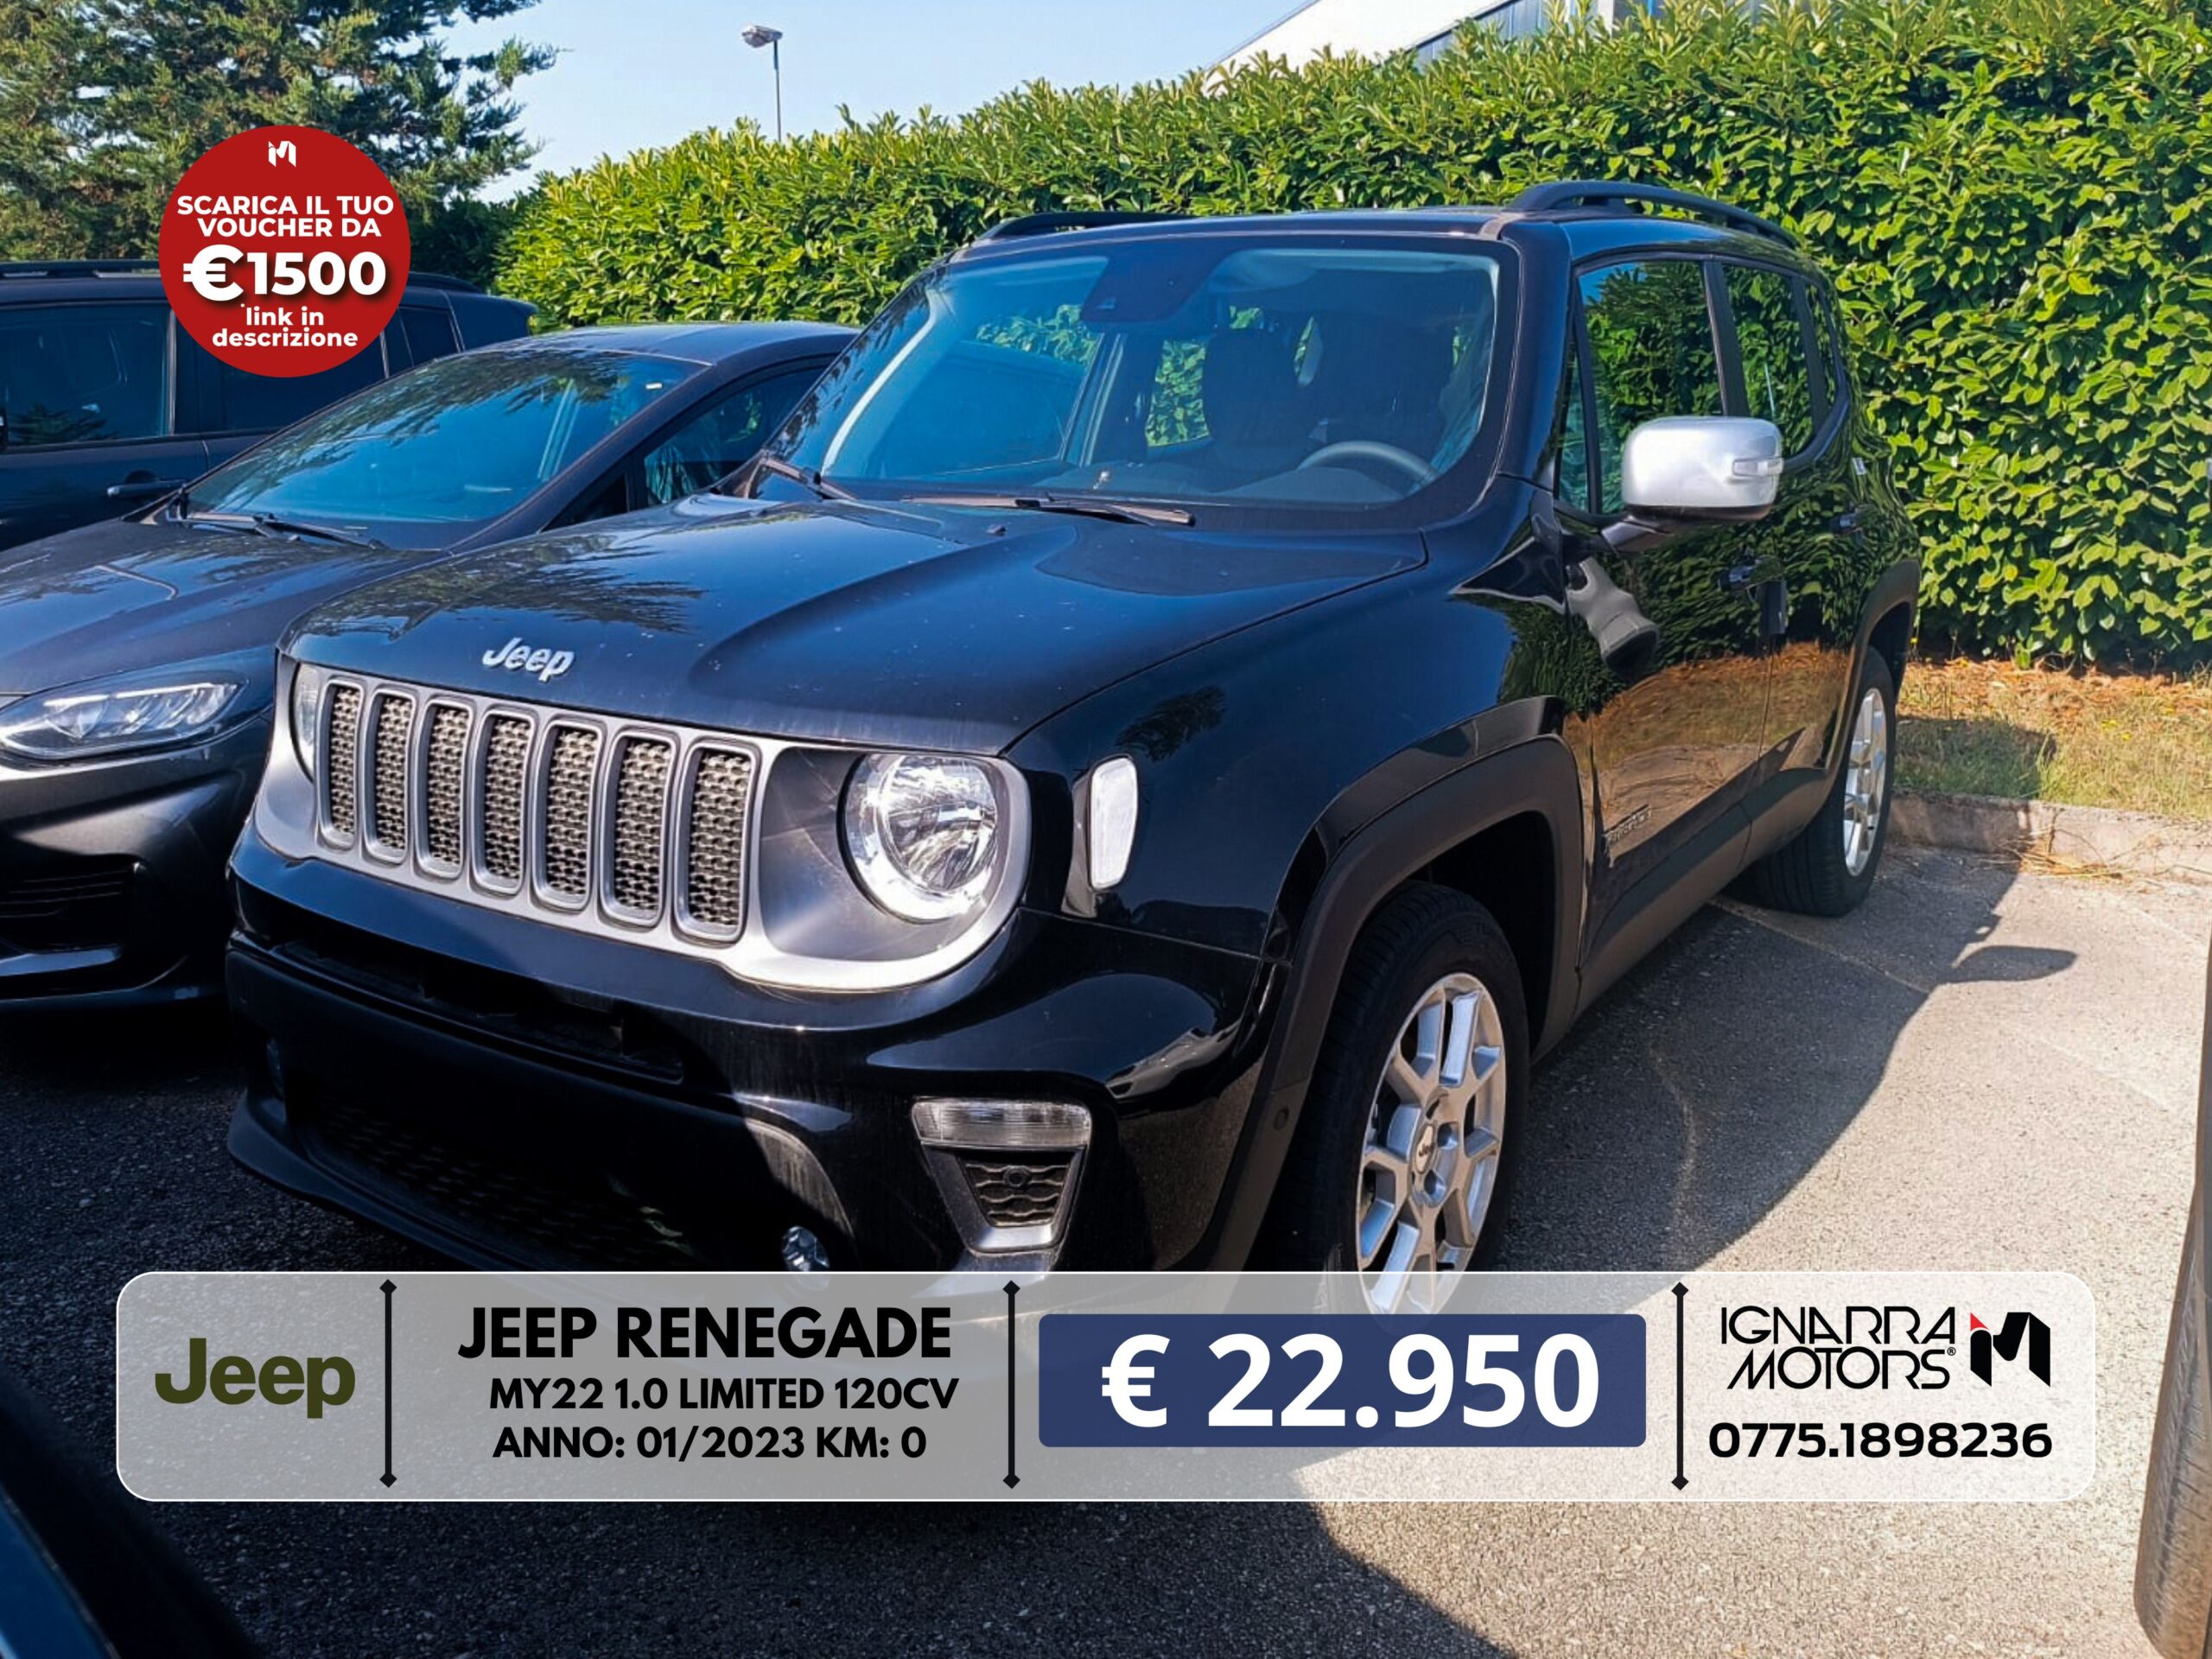 JEEP RENEGADE MY22 1.0 LIMITED 120CV